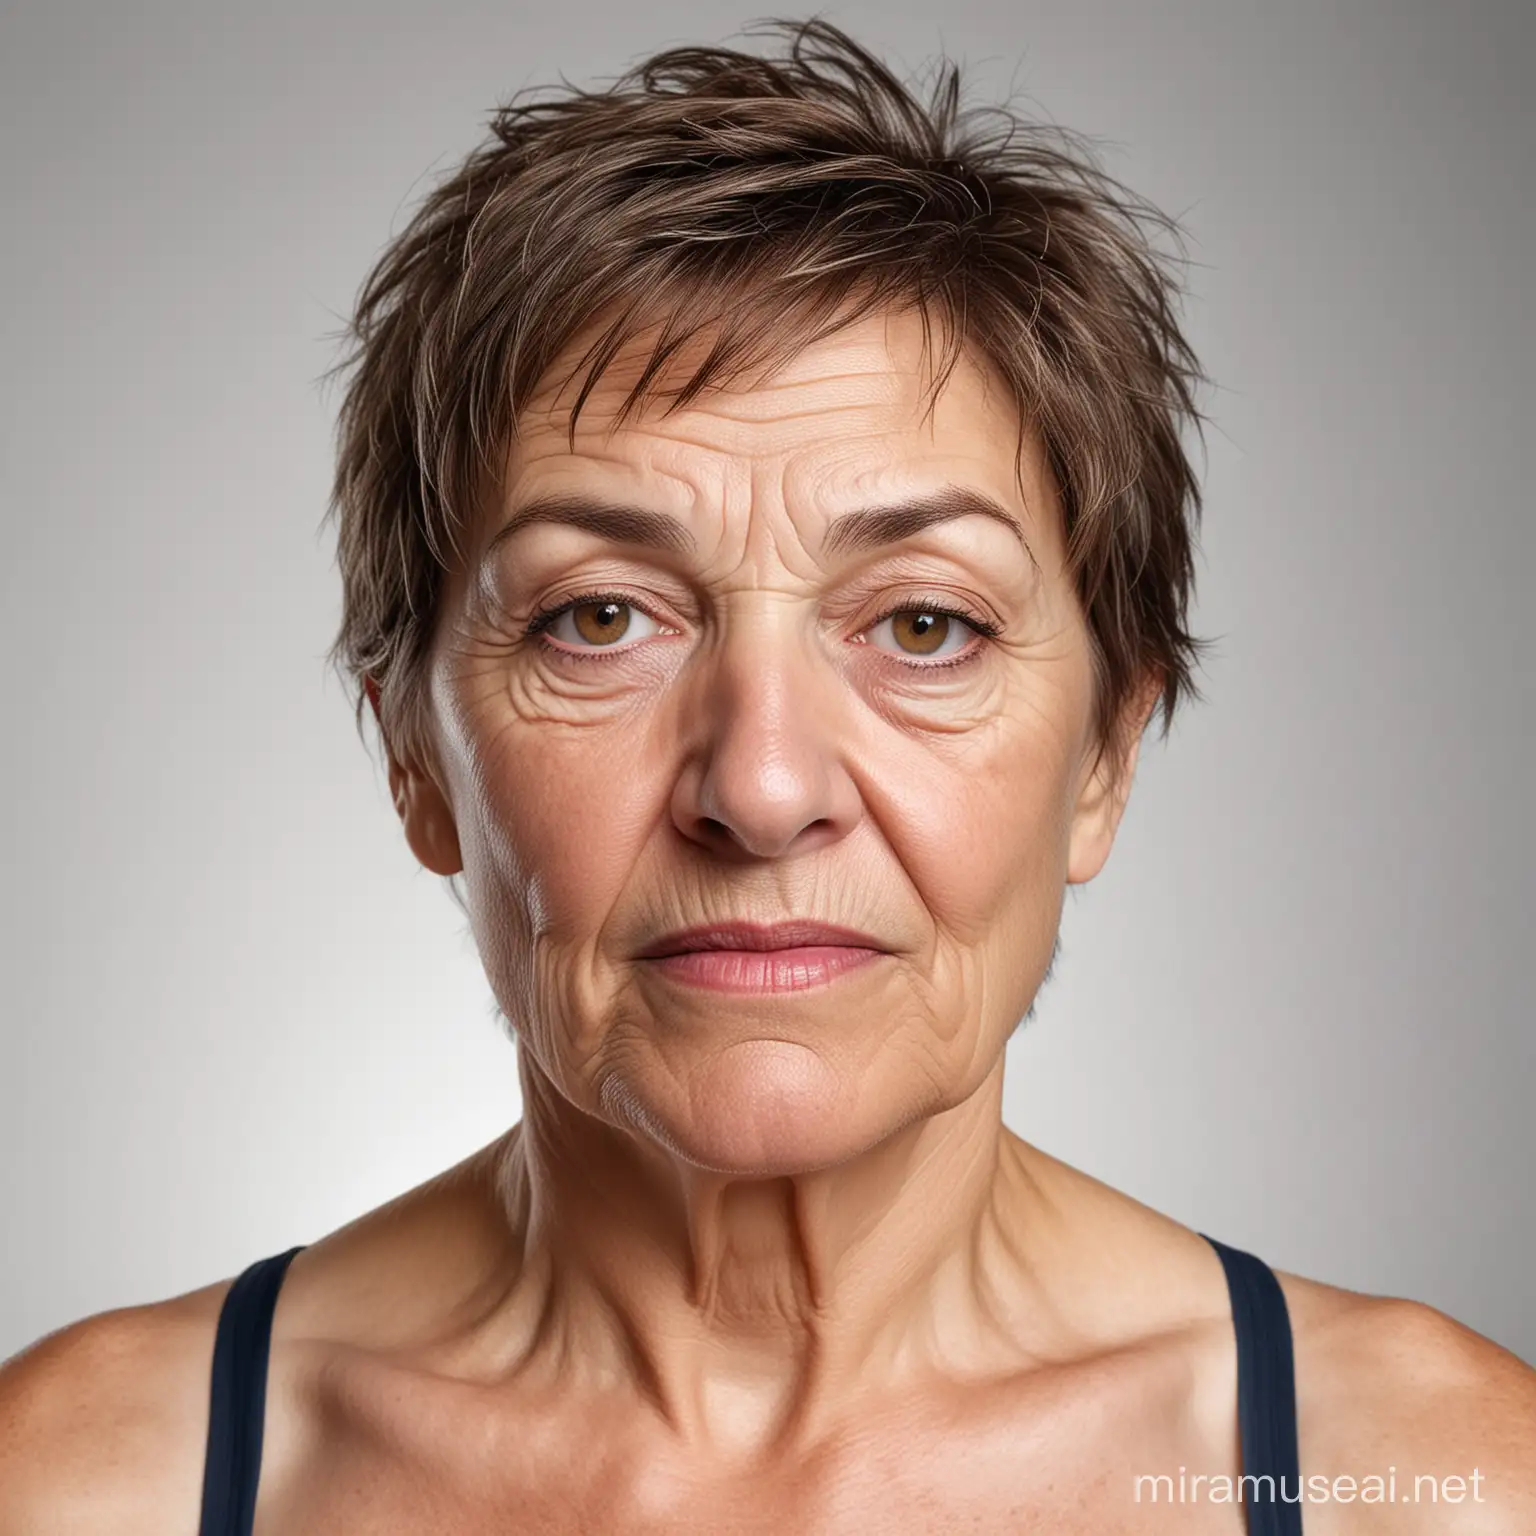 "A passport style hyper realism headshot portrait of an ugly older woman with Caucasian ethnicity, dressed professionally. She has short brown hair and hazel eyes. She is wearing a swimsuite wearing no makeup. The background is solid white. Her expression is naughty and she is facing forward towards the camera."
